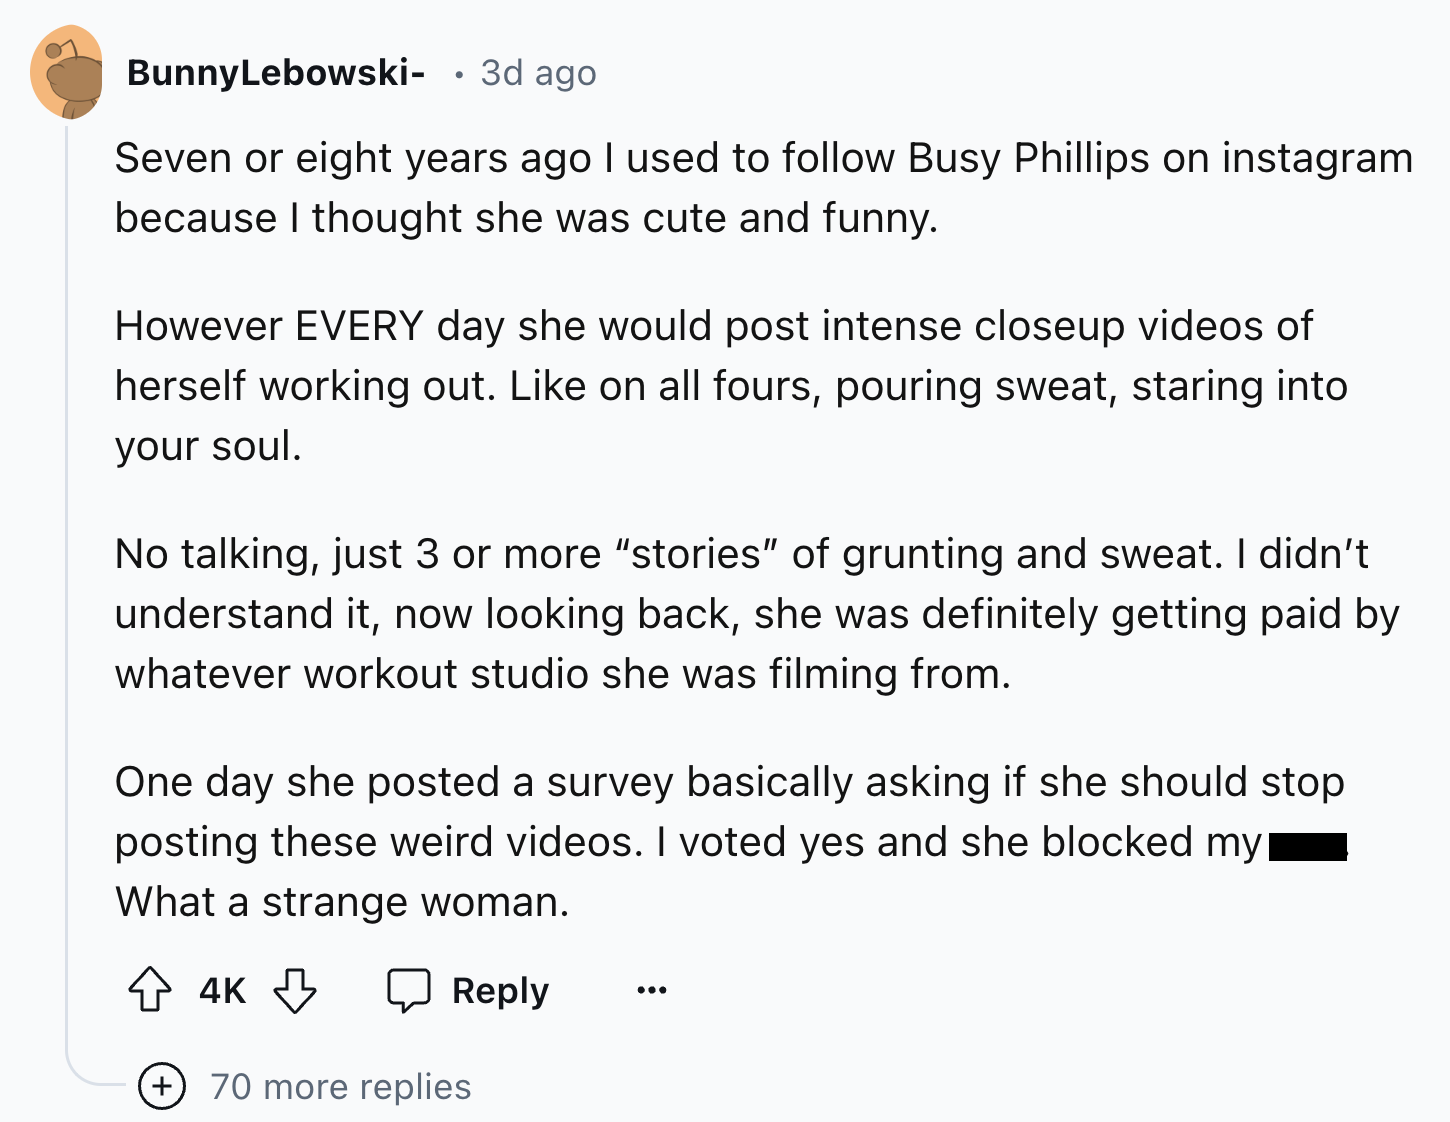 document - BunnyLebowski . 3d ago Seven or eight years ago I used to Busy Phillips on instagram because I thought she was cute and funny. However Every day she would post intense closeup videos of herself working out. on all fours, pouring sweat, staring 